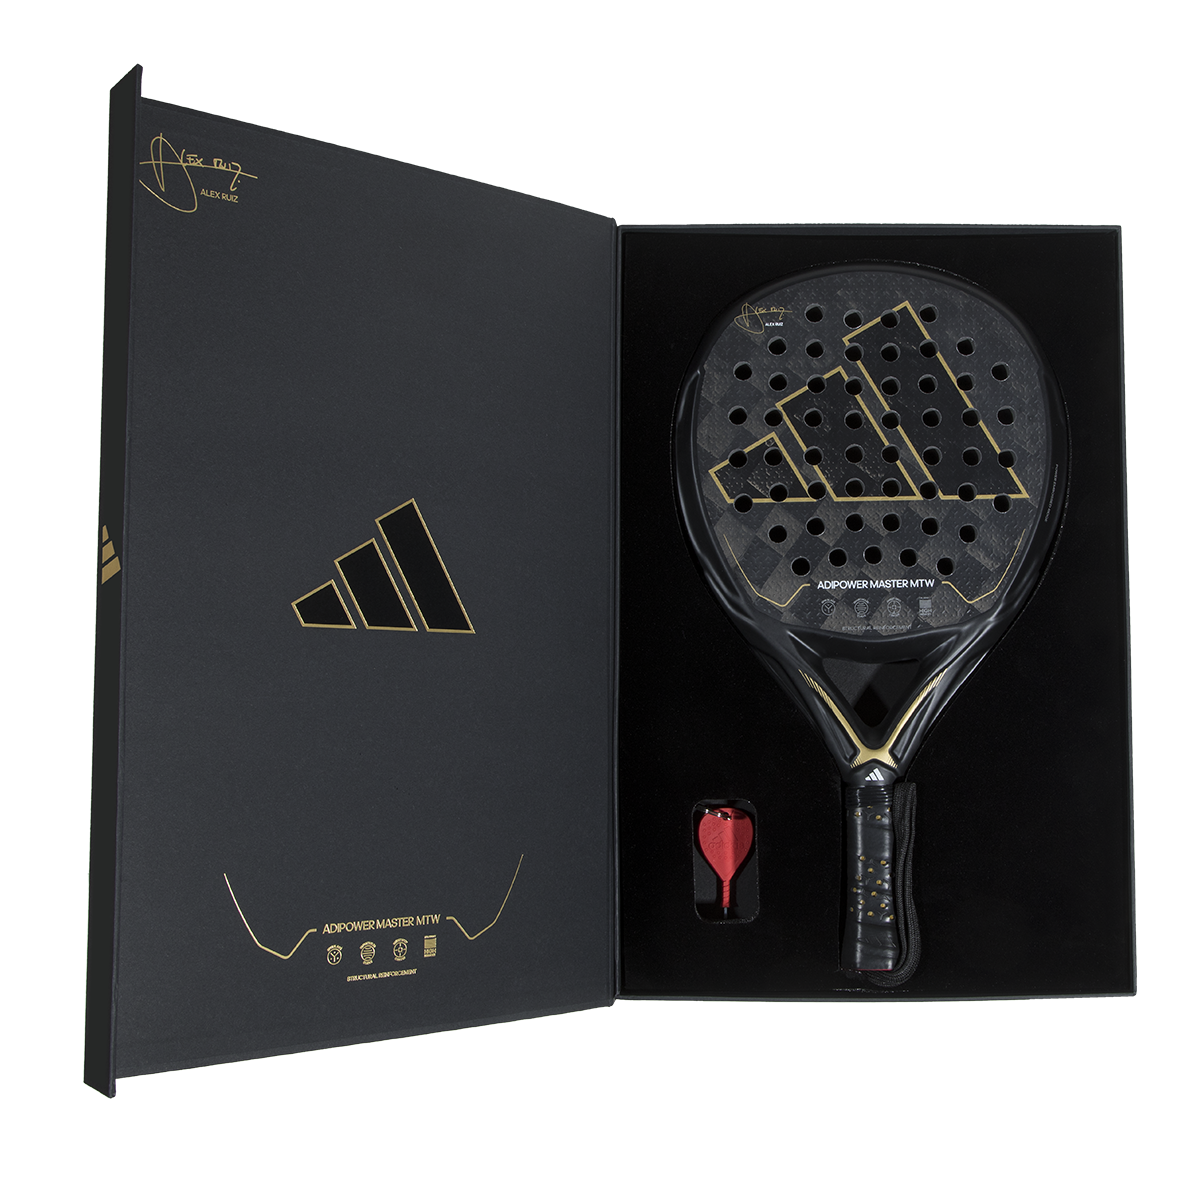 Adipower Padel Racket Master Multiweight Limited Edition